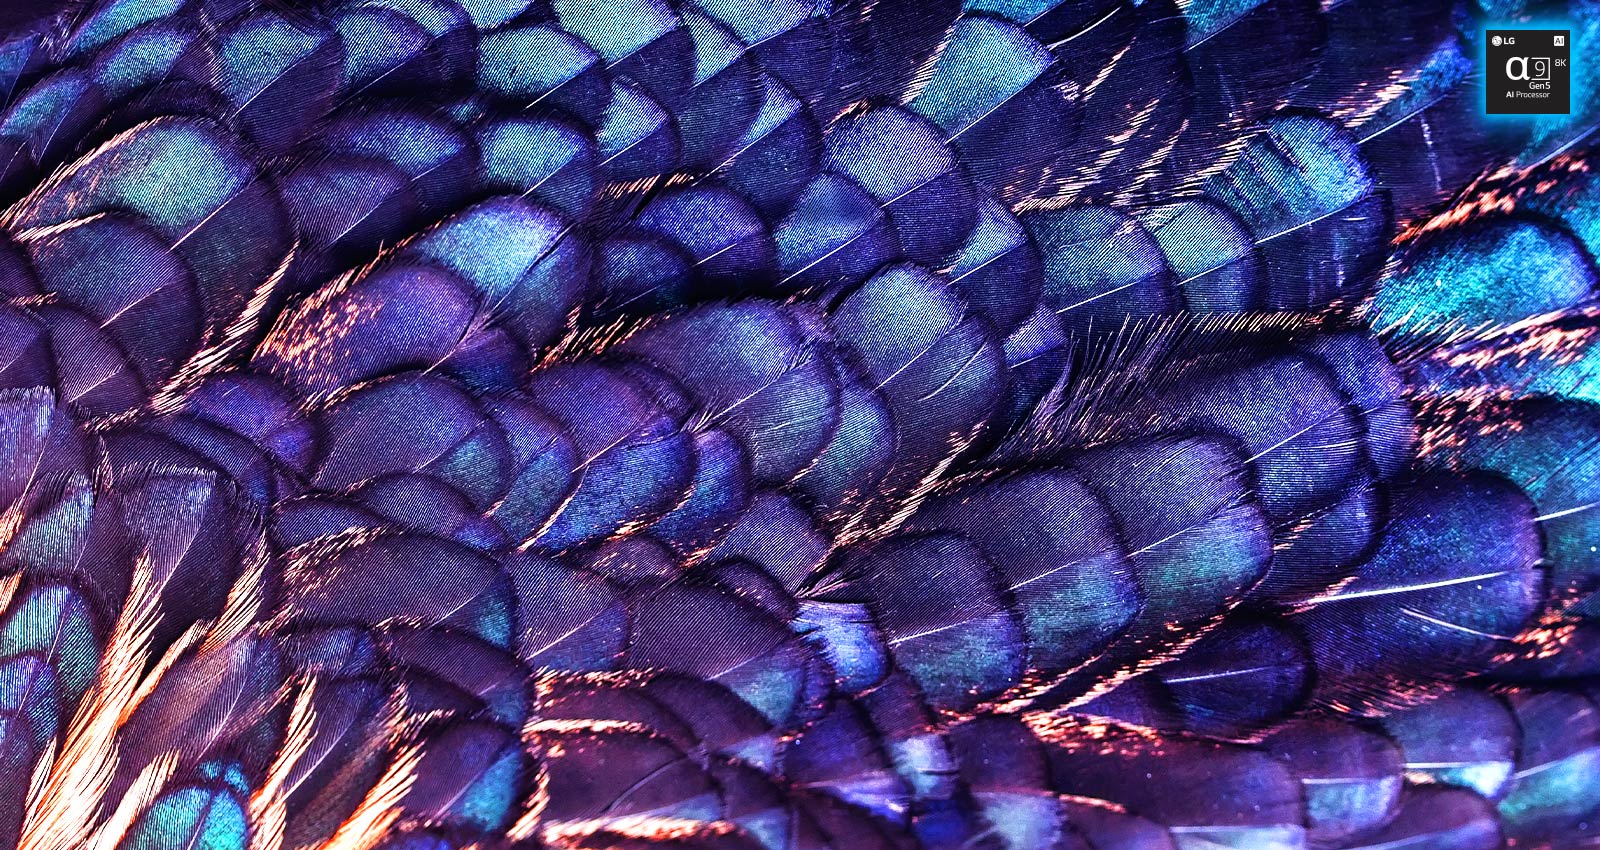 There is an image of textures of bright iridescent feathers of a fairy bird of lilac colour. The image is split into two – the top part is a more vivid one and says AI 8K upscaling with Processor chip image and the bottom one is more pale.